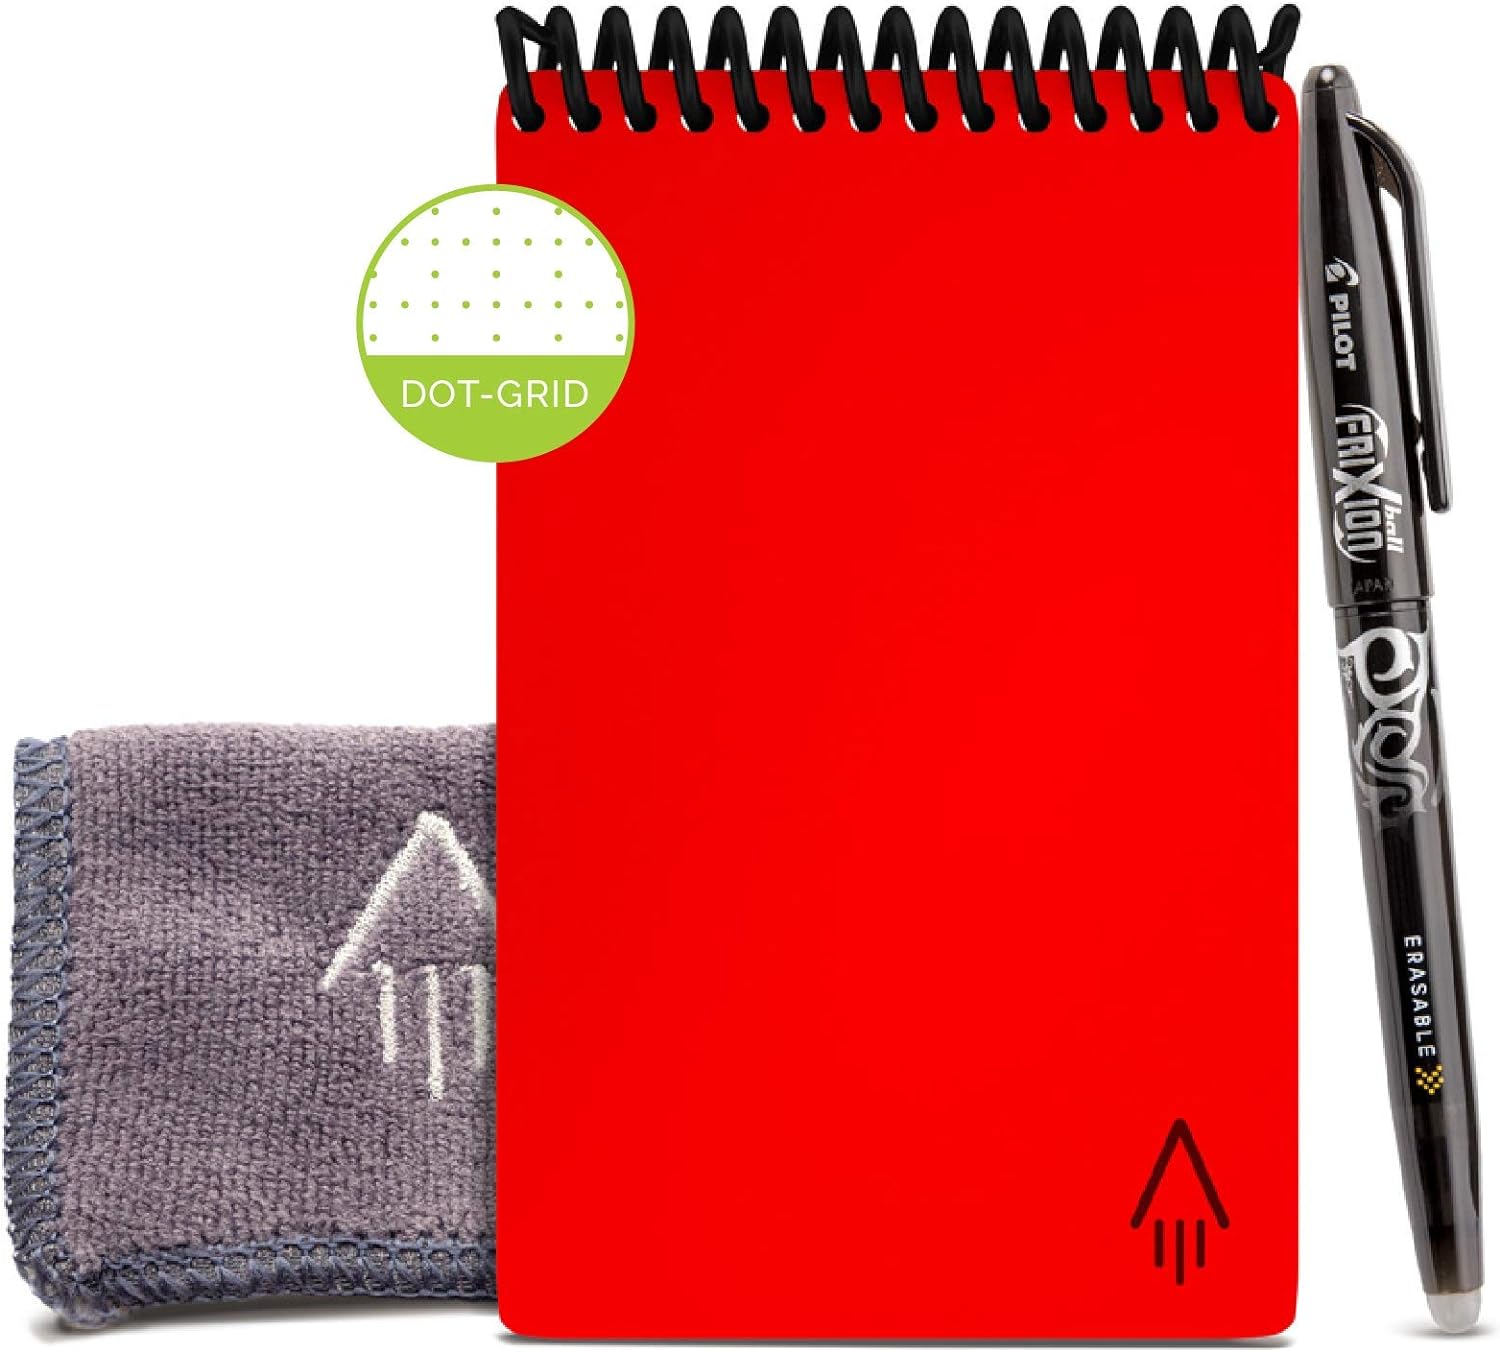 Rocketbook Smart Reusable Notebook - Dotted Grid Eco-Friendly Notebook with 1 Pilot Frixion Pen & 1 Microfiber Cloth Included - Atomic Red Cover, Mini Size (3.5 x 5.5)